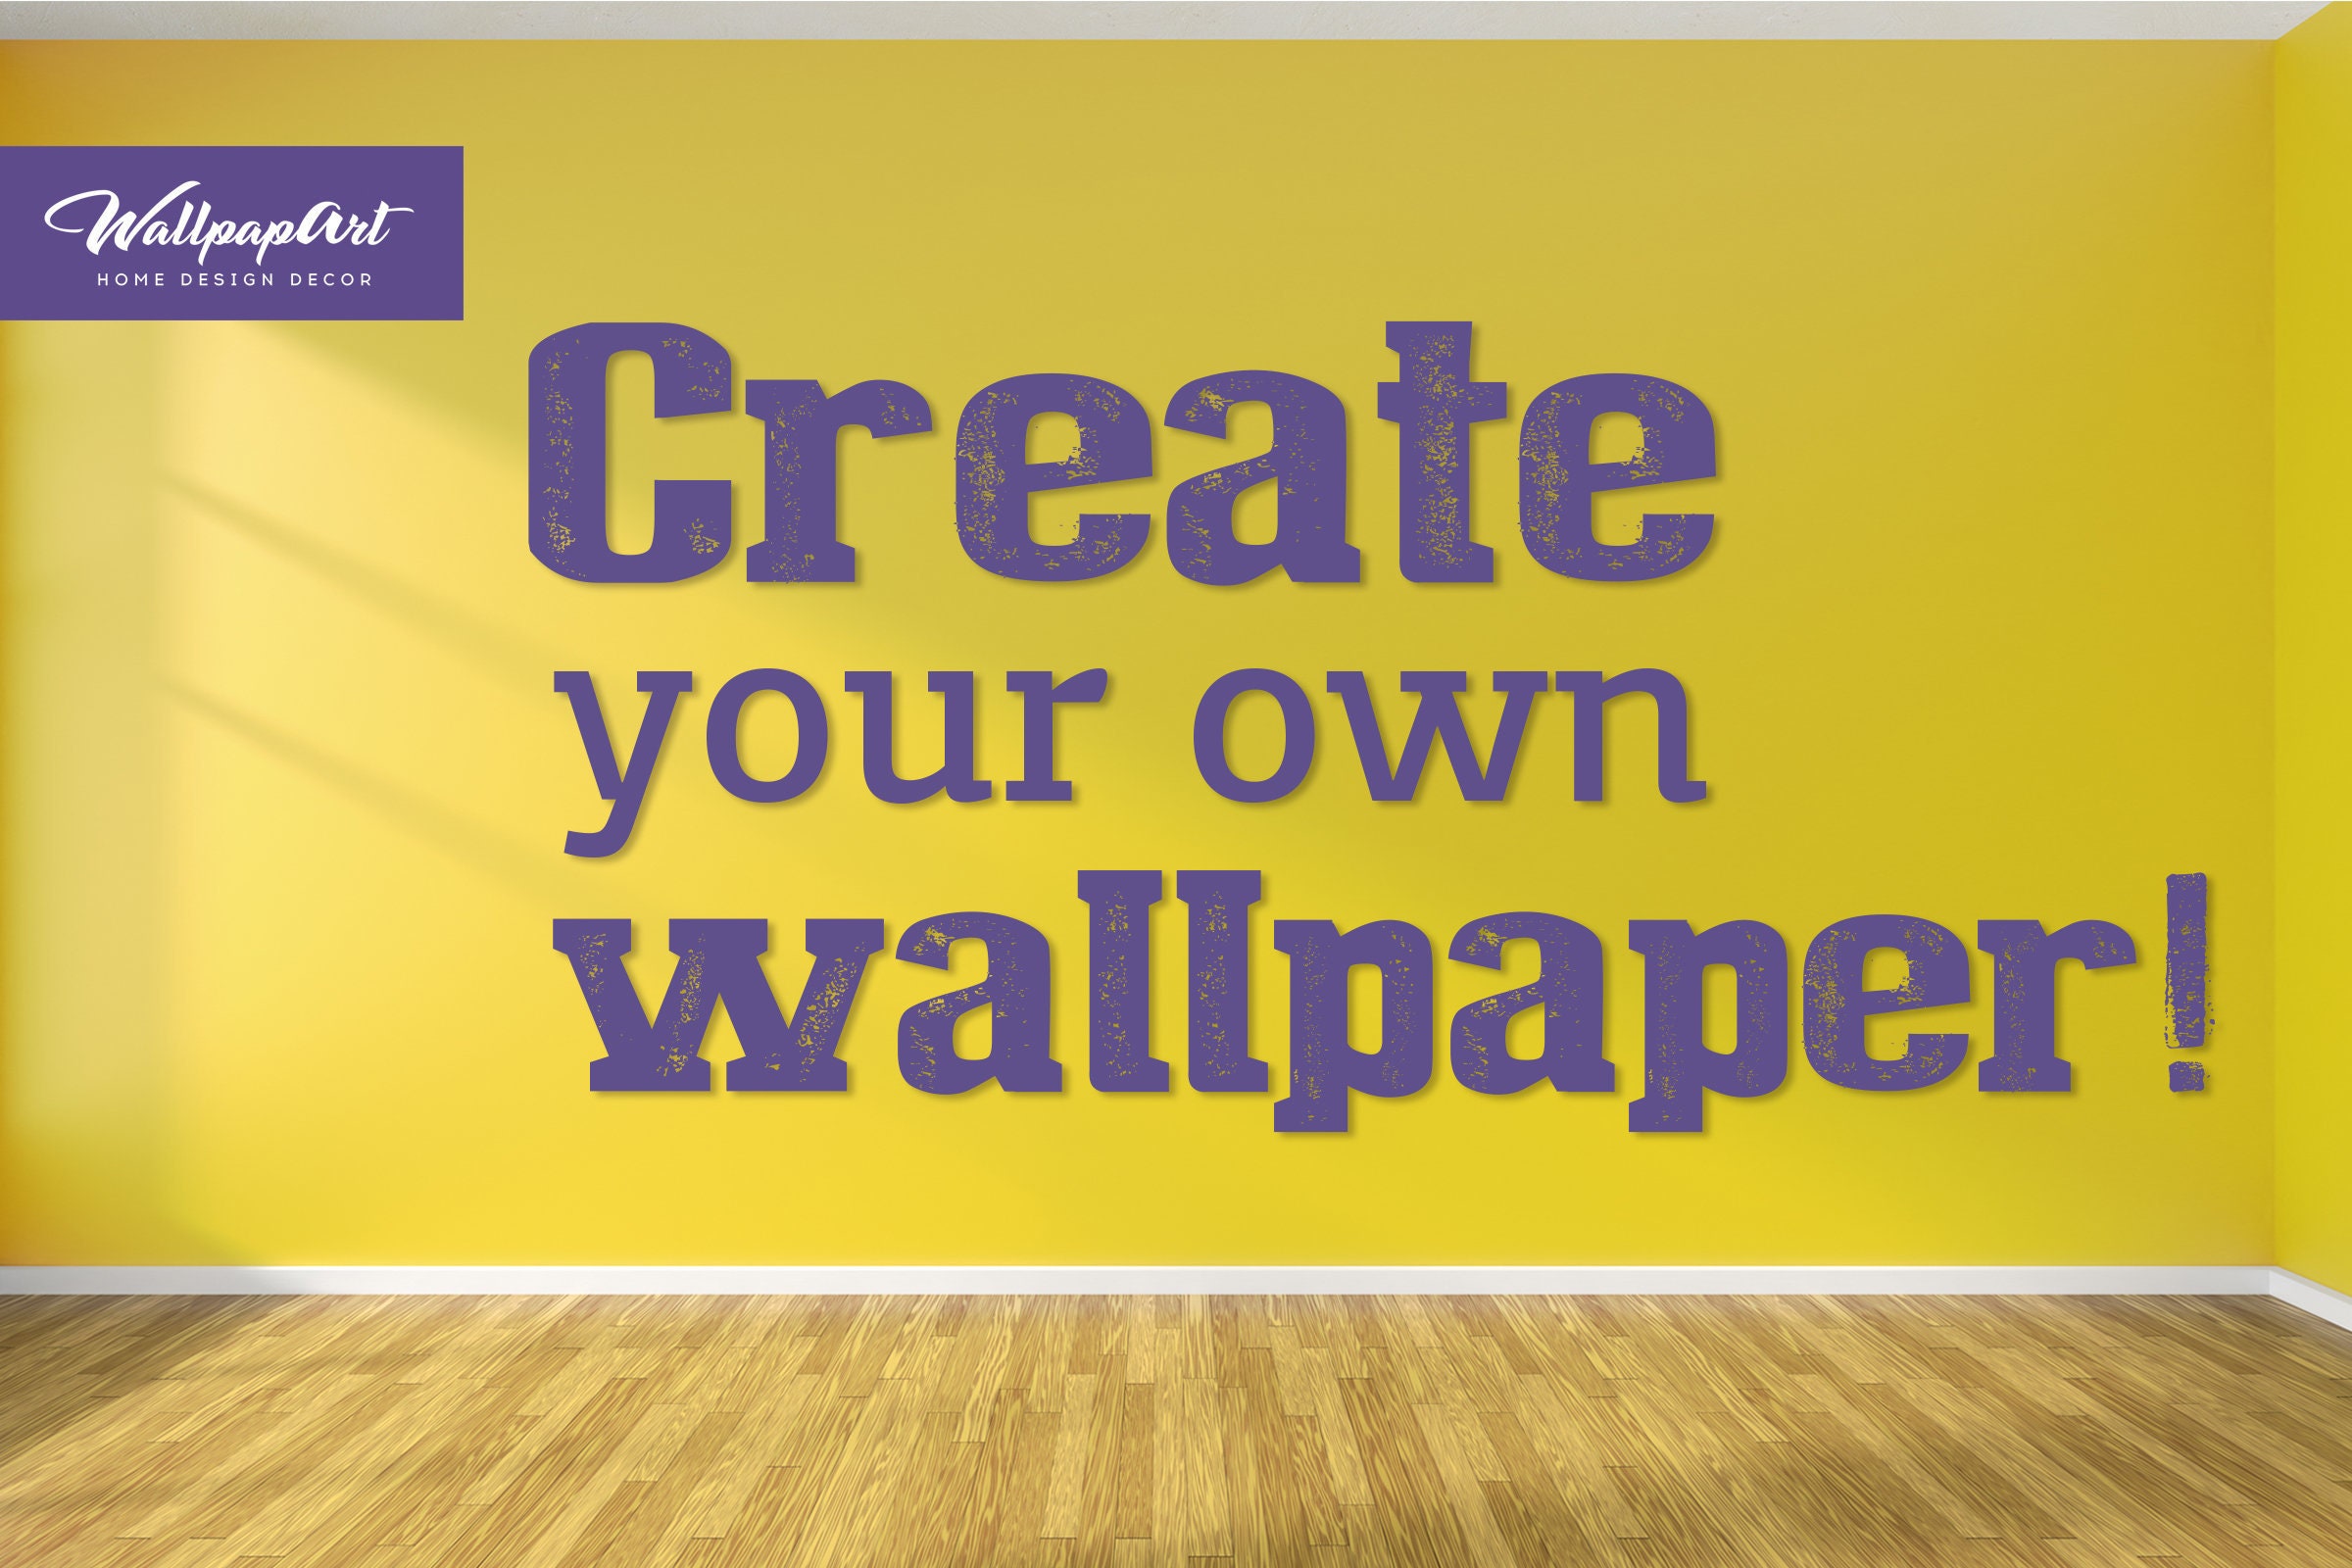 Custom Wallpaper Removable or Traditional Customized Wall - Etsy New Zealand